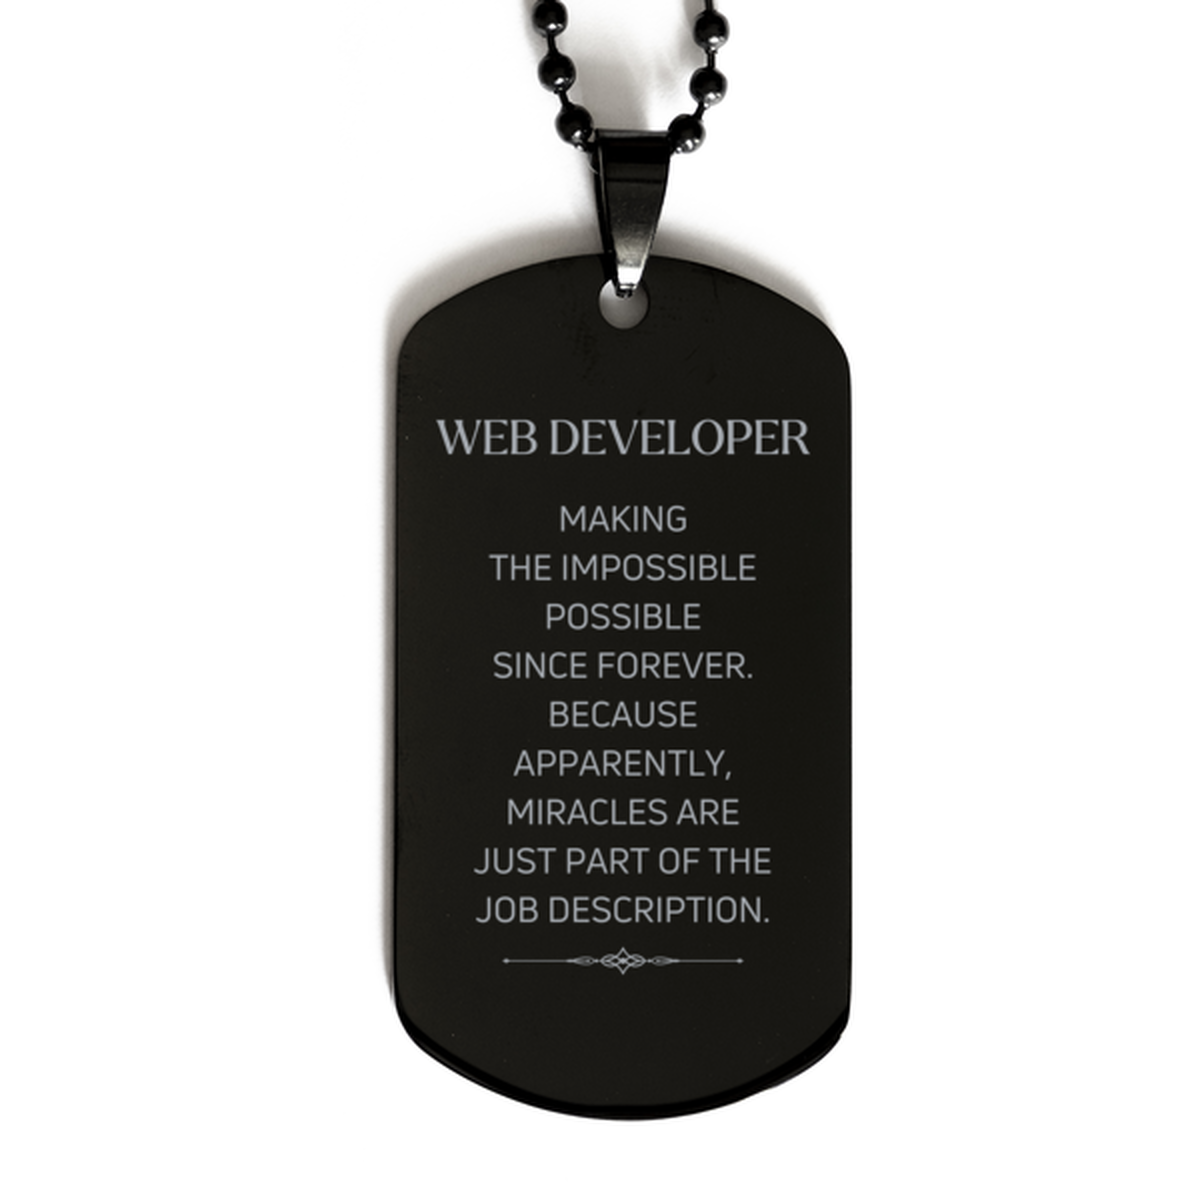 Funny Web Developer Gifts, Miracles are just part of the job description, Inspirational Birthday Black Dog Tag For Web Developer, Men, Women, Coworkers, Friends, Boss